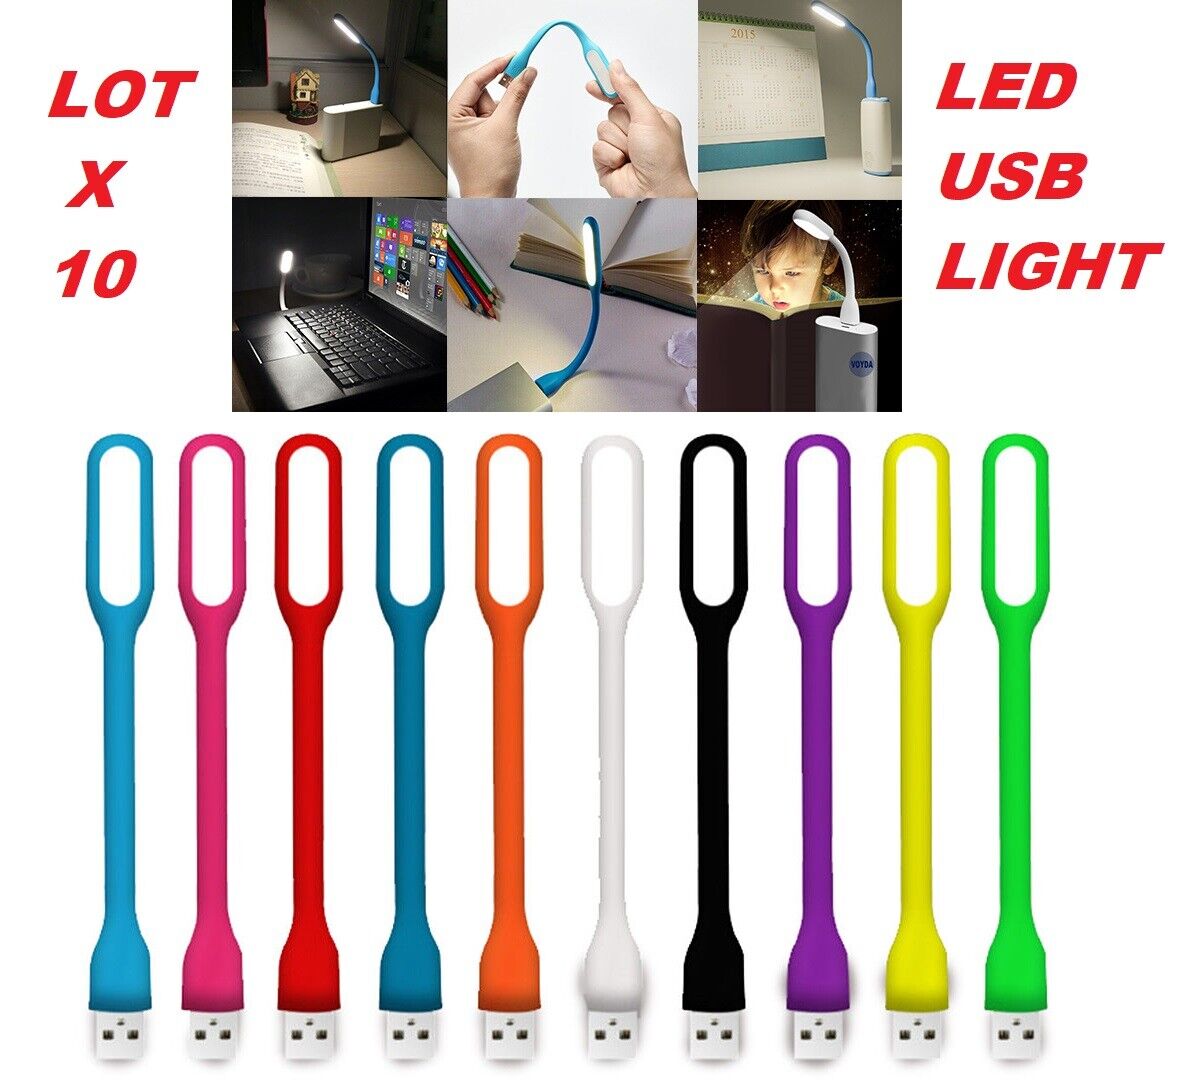 new lot 10 USB LED Light Lamp for Computer Keyboard Laptop Notebook power bank  Ving 0346002159000